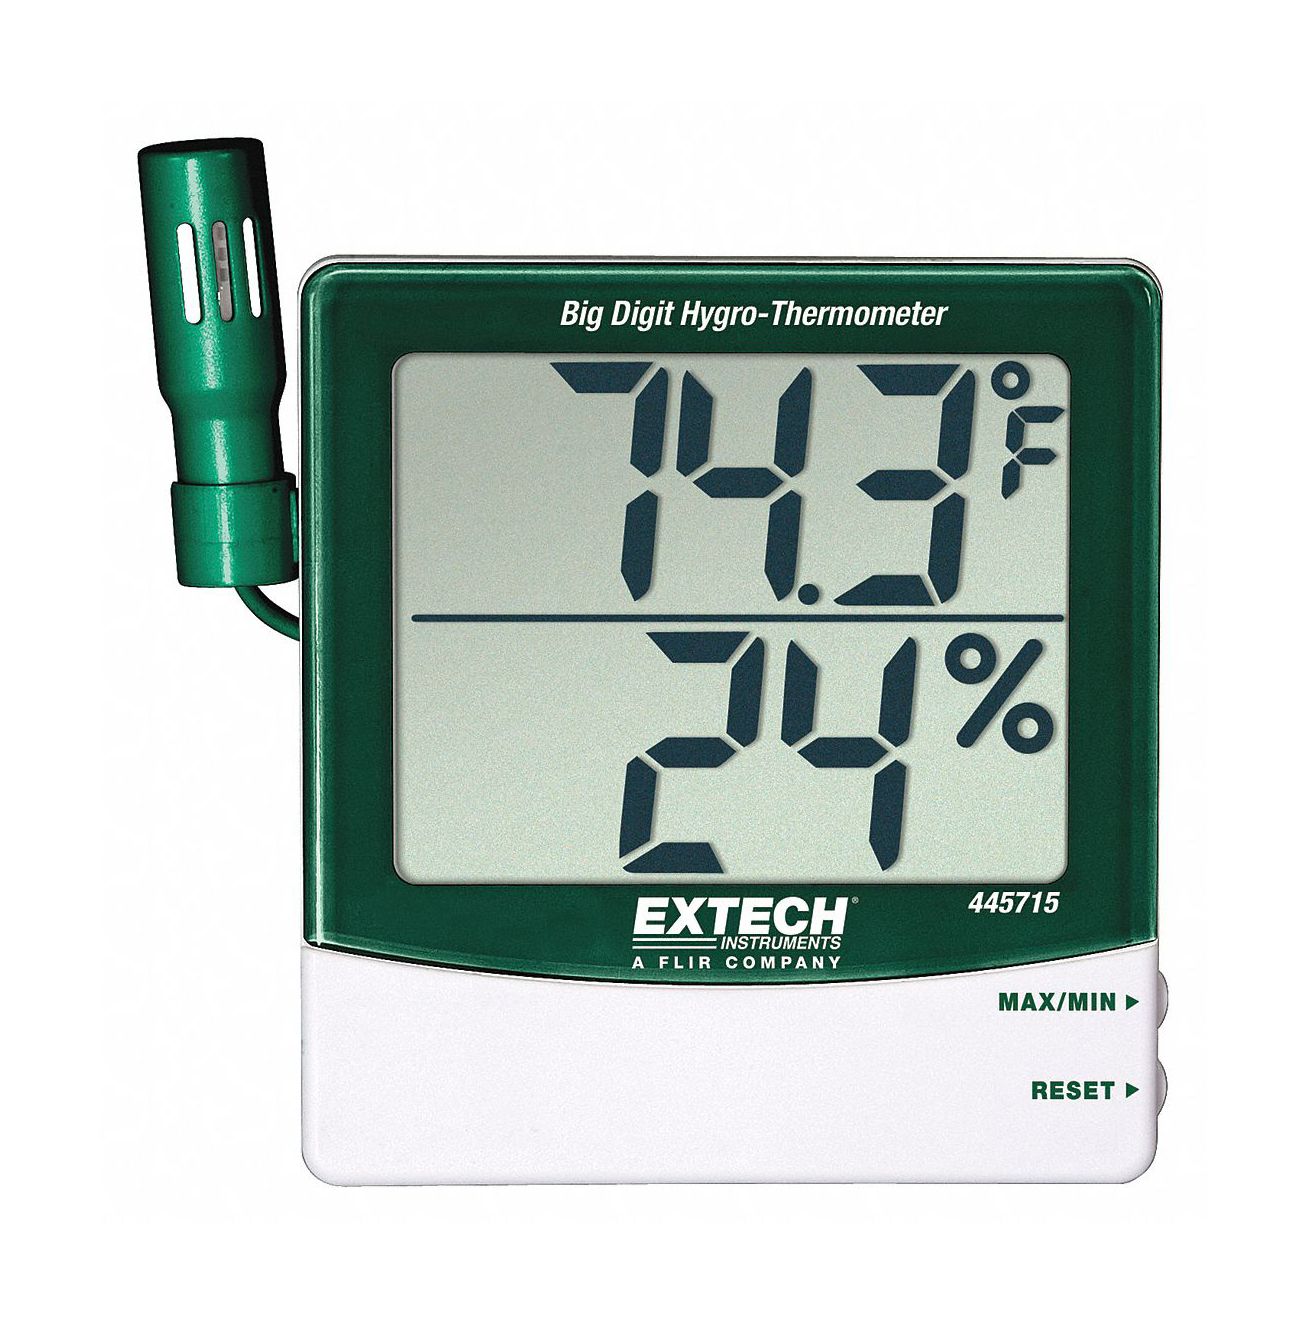 ThermoPro TP49 3 Pieces Digital Hygrometer Indoor Thermometer Humidity  Meter Mini Hygrometer Thermometer with Temperature and Humidity Monitor  Room